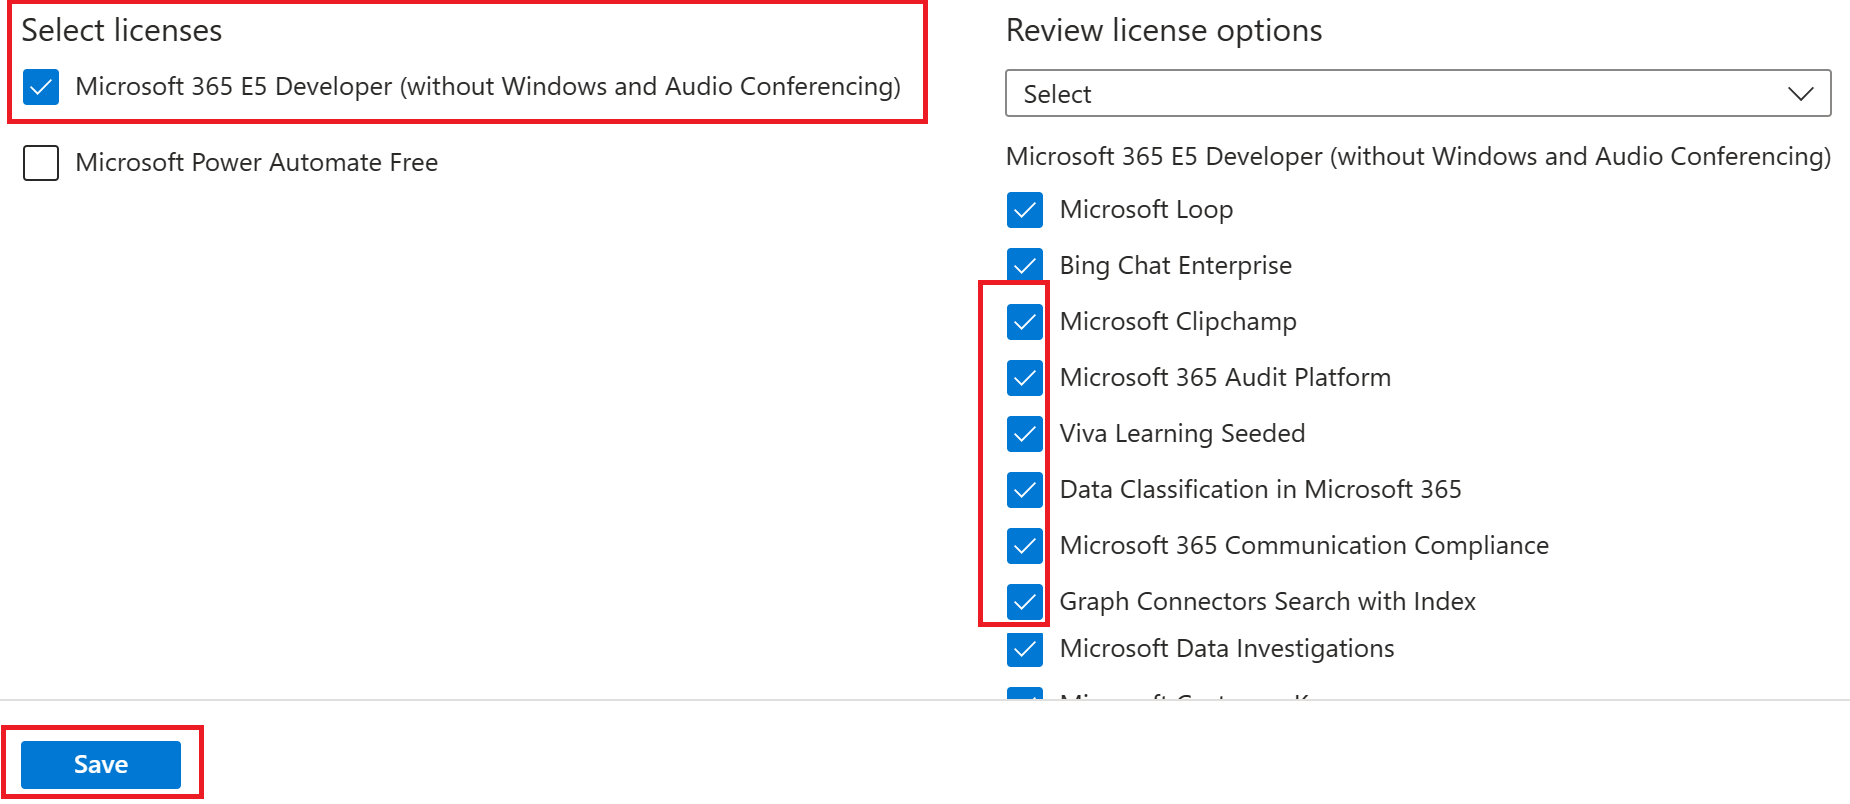 Screenshot of the Update license assignments page and the available licenses highlighted. Office 365 E5 and Windows 10 Enterprise E3 are selected. Selecting these licenses brings up a list of products available in those licenses, like Microsoft Bookings, Project, and others. You can choose to remove specific products.